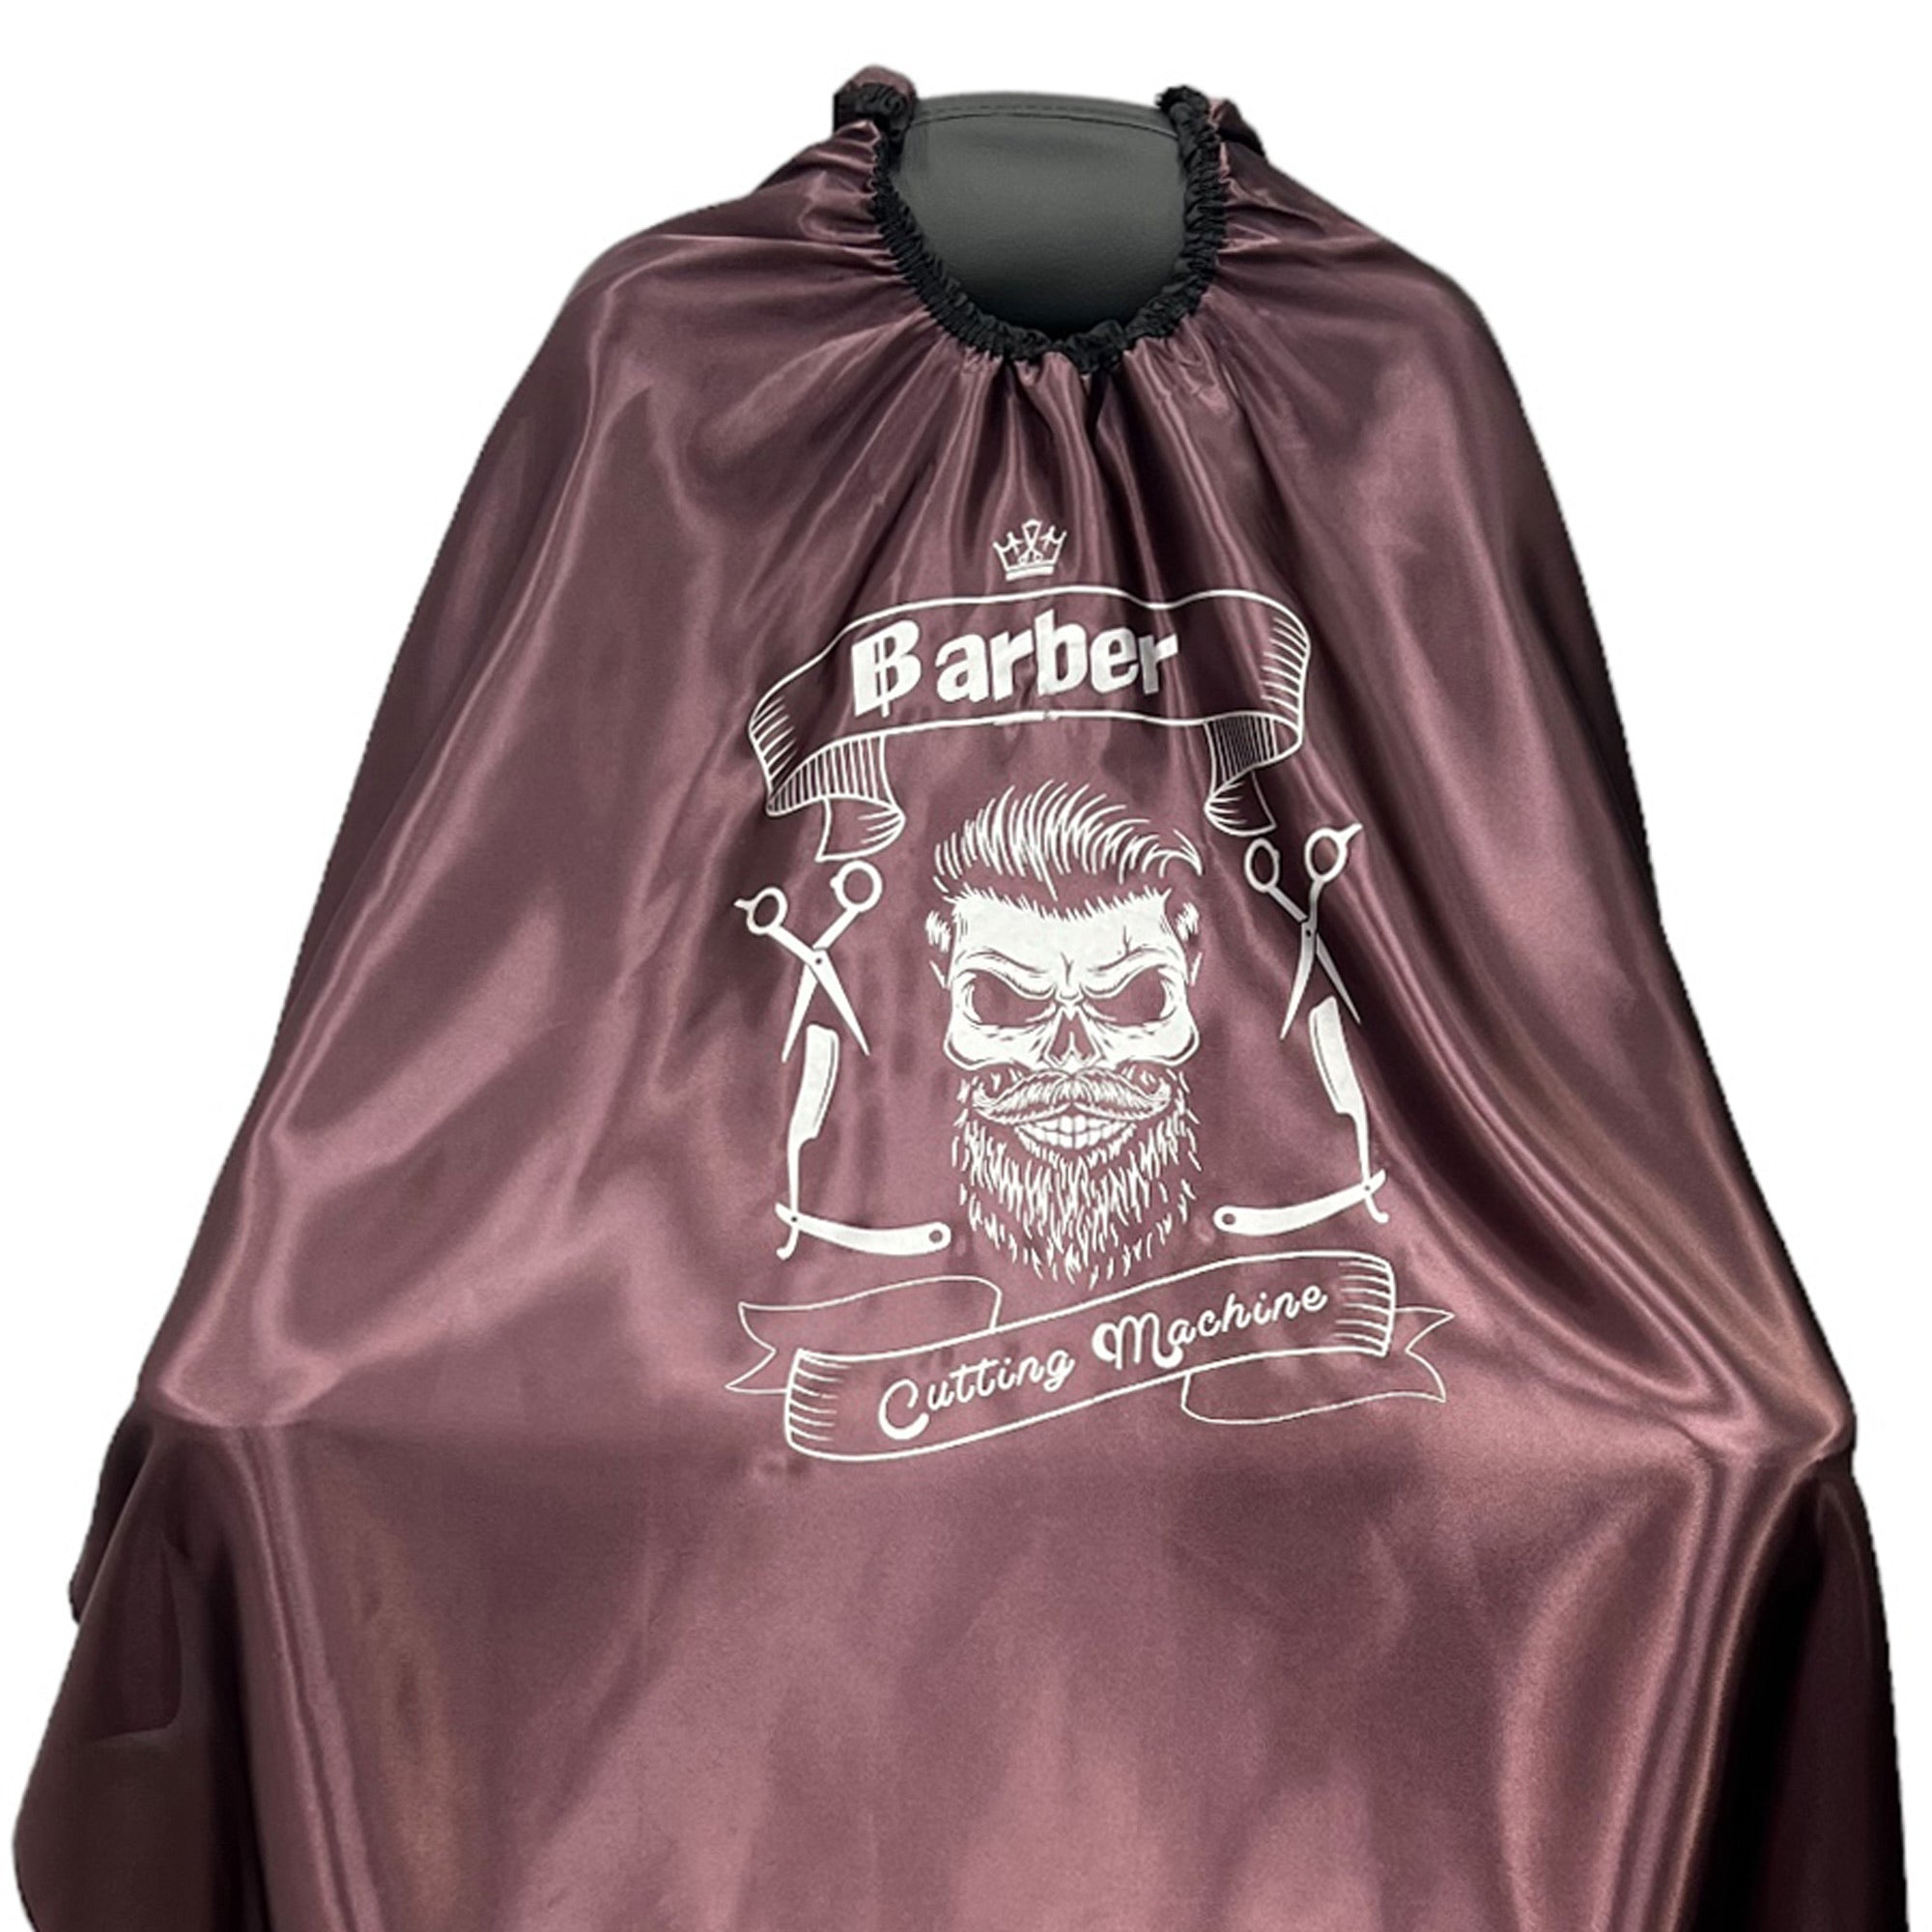 Gabri - Barber Hairdressing Hair Cutting Capes & Gowns Skull Pattern (Syrah)